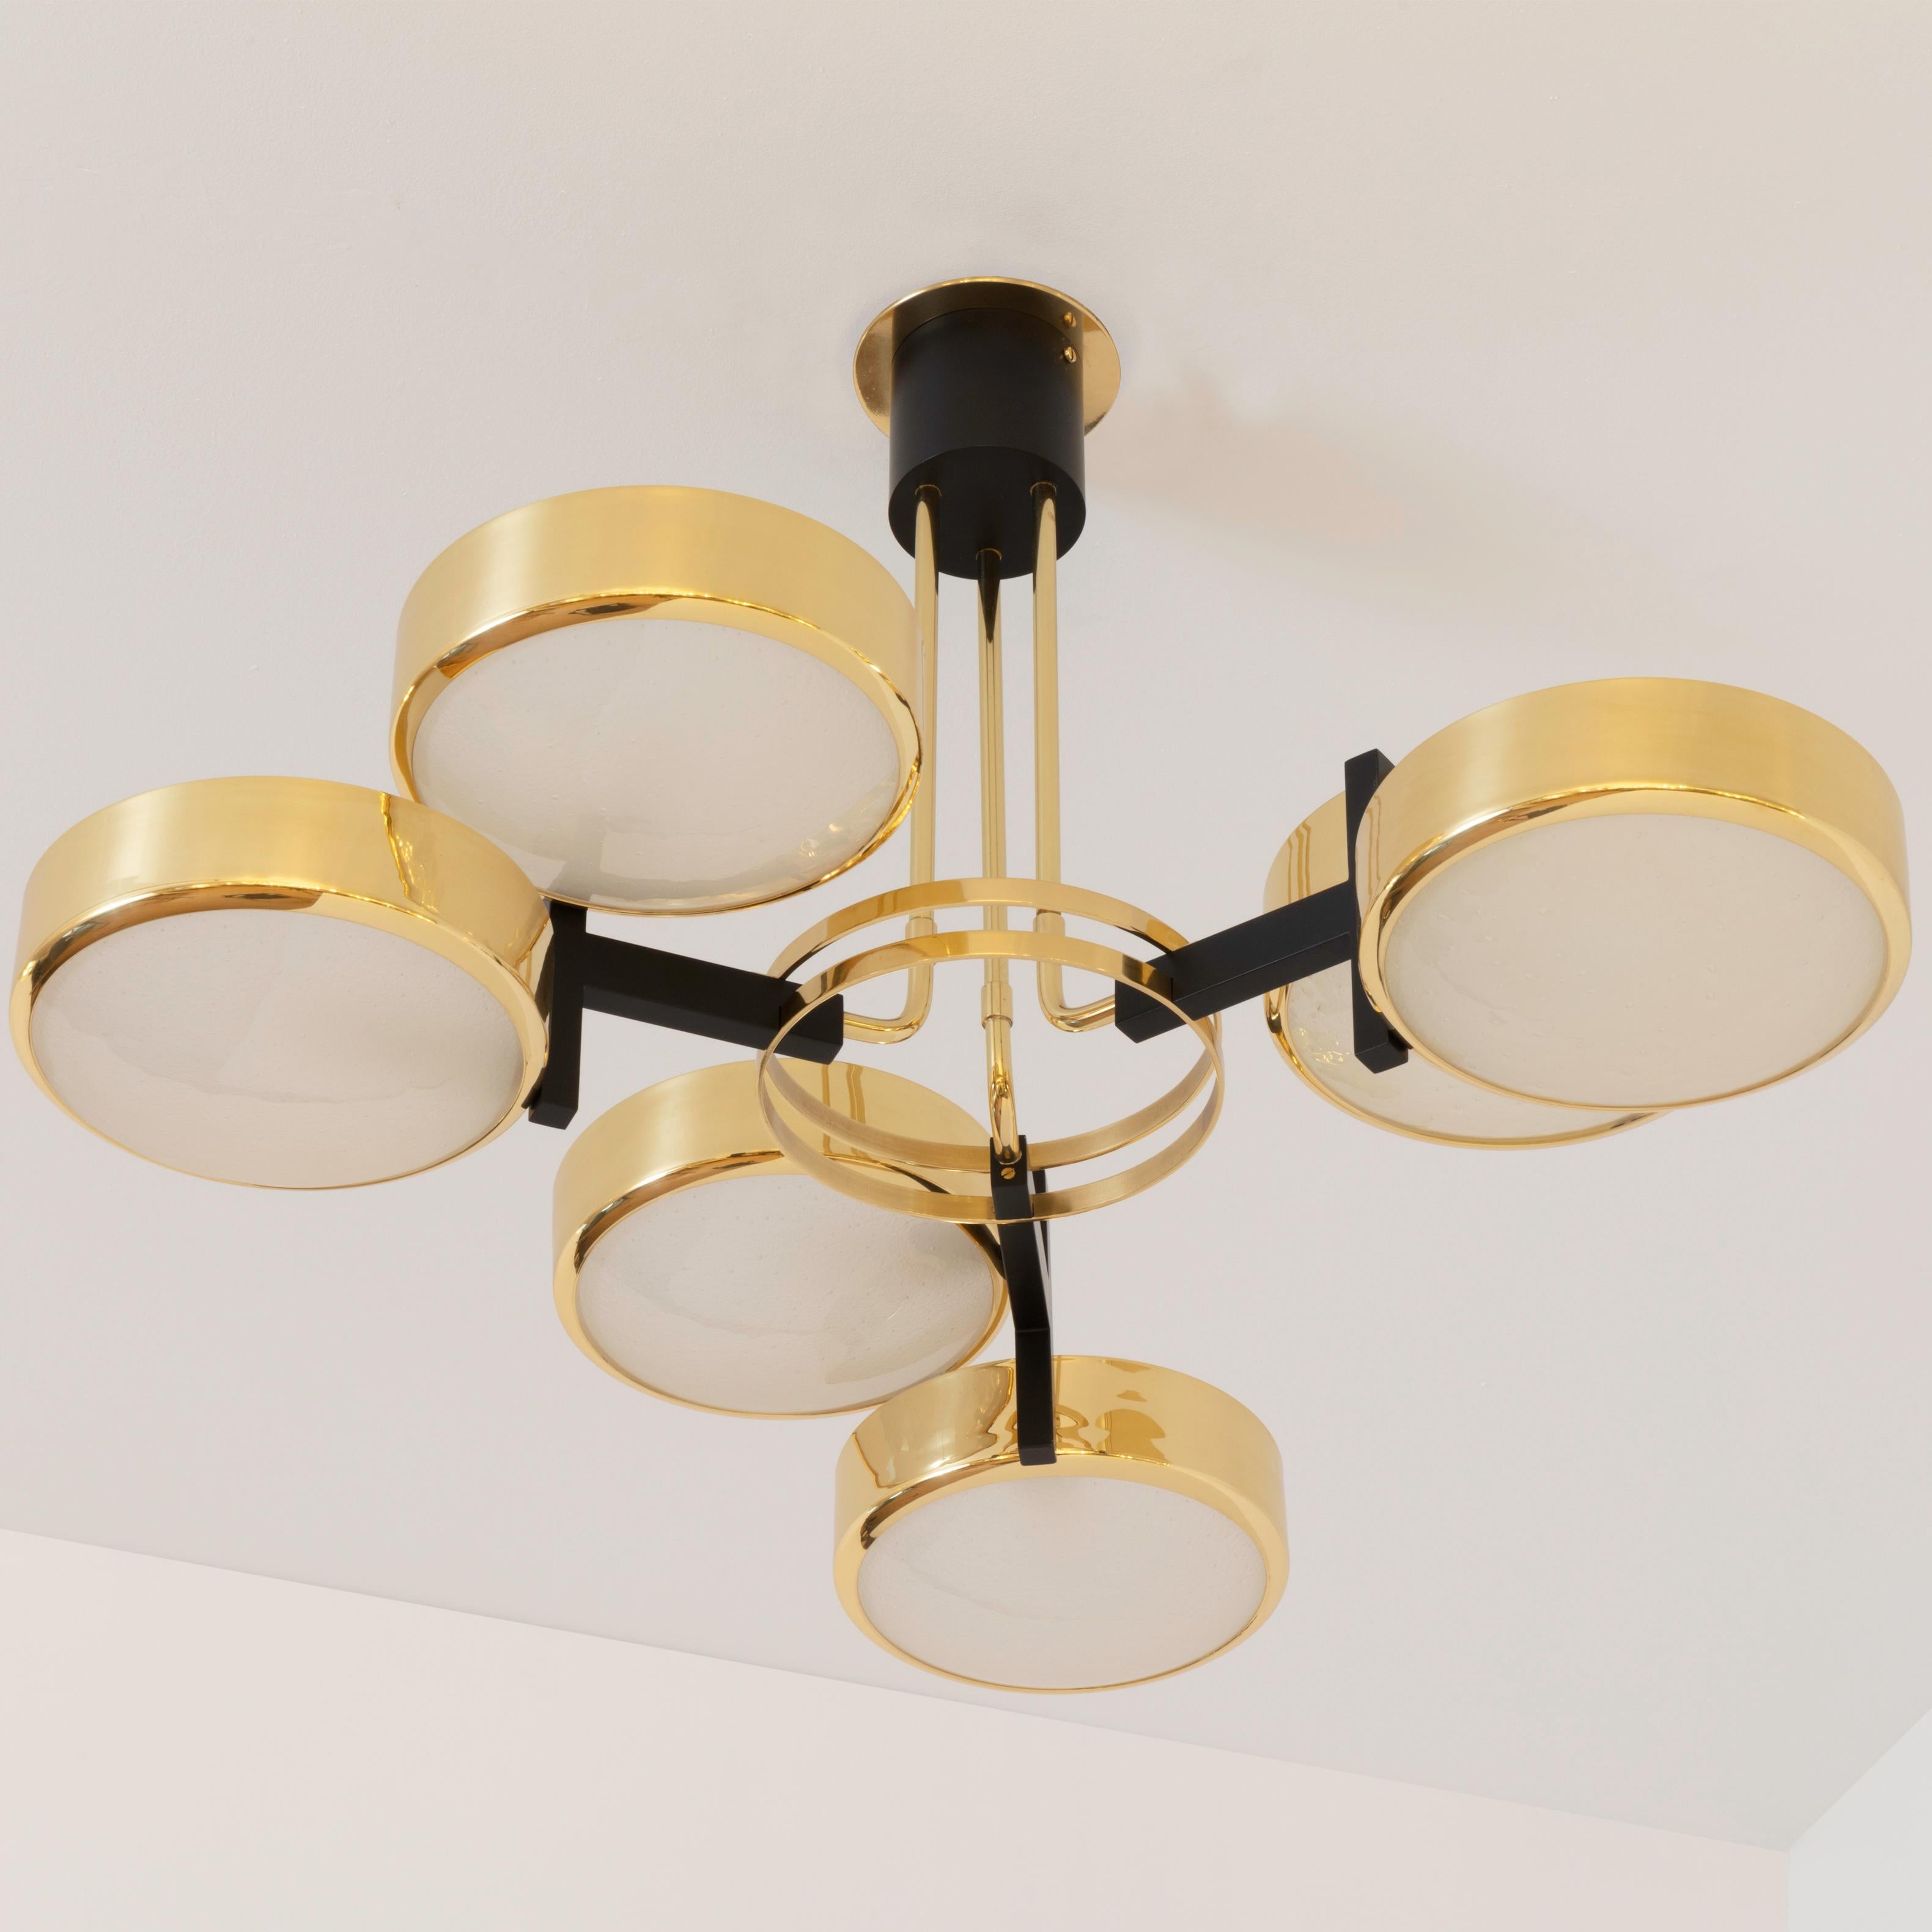 Italian Eclissi Ceiling Light by Gaspare Asaro-Polished Nickel and Black Finish For Sale